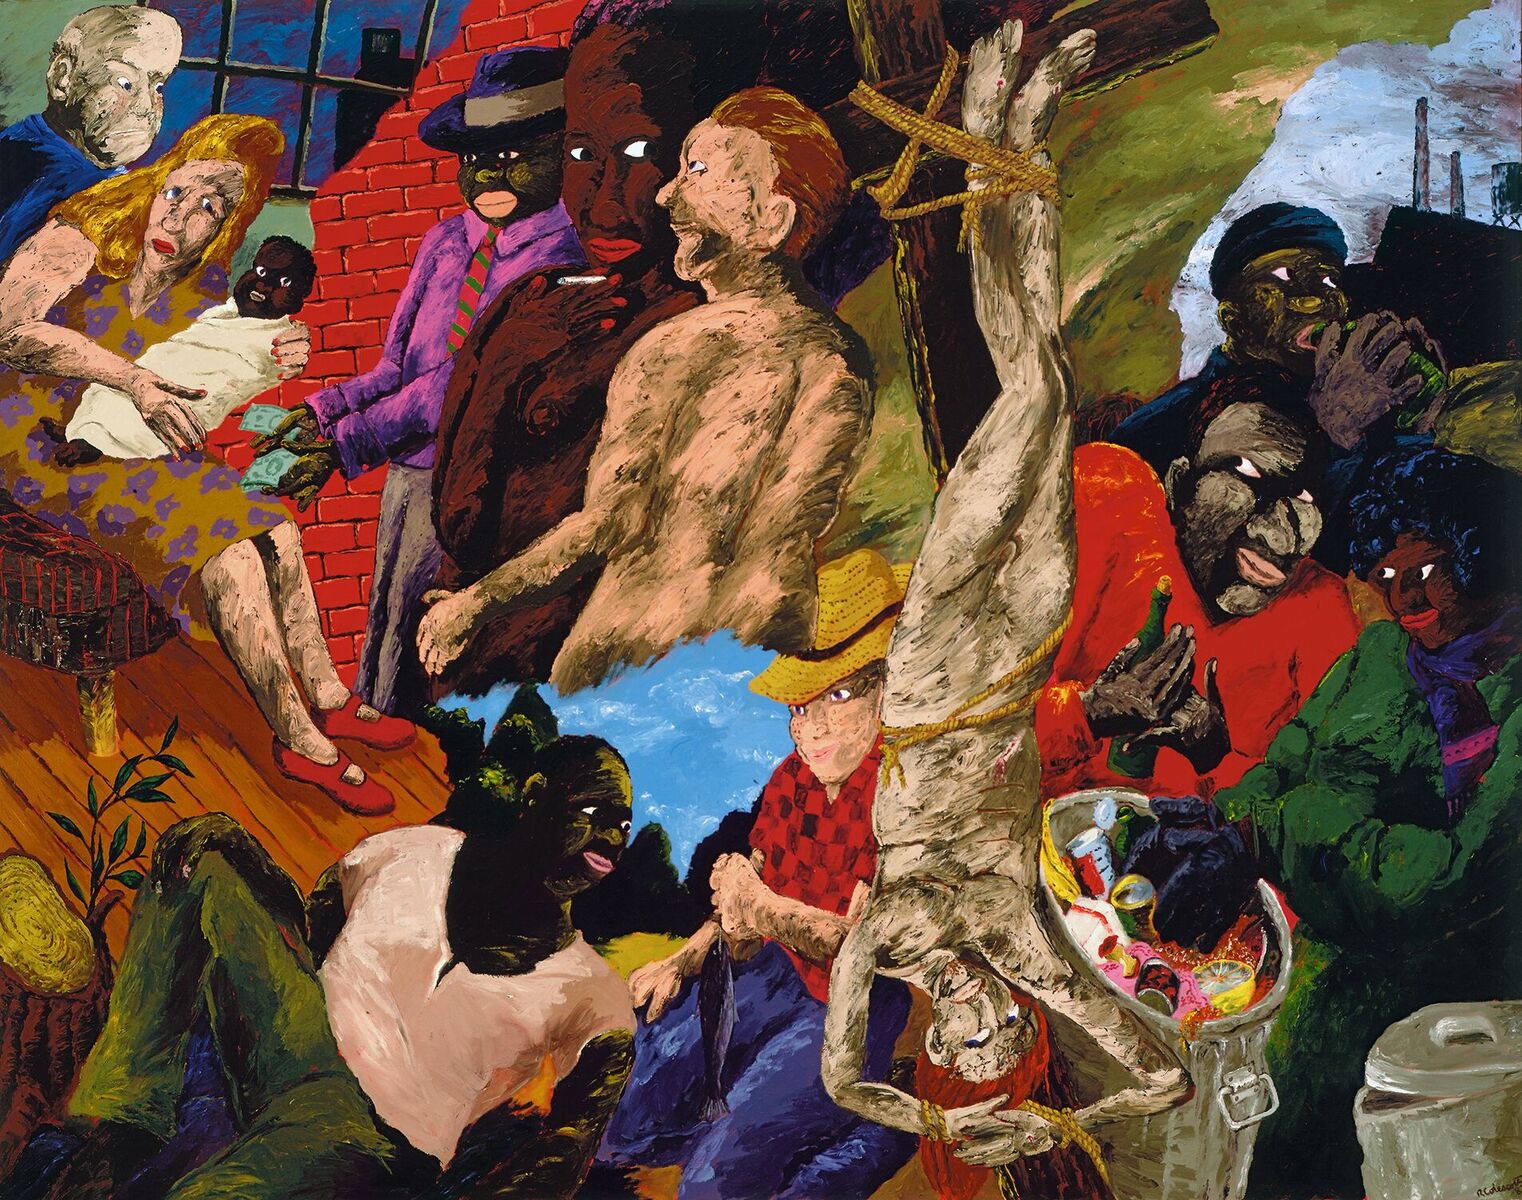 Knowledge of the Past is the Key to the Future: Upside Down Jesus and the Politics of Survival, 1987, Robert Colescott